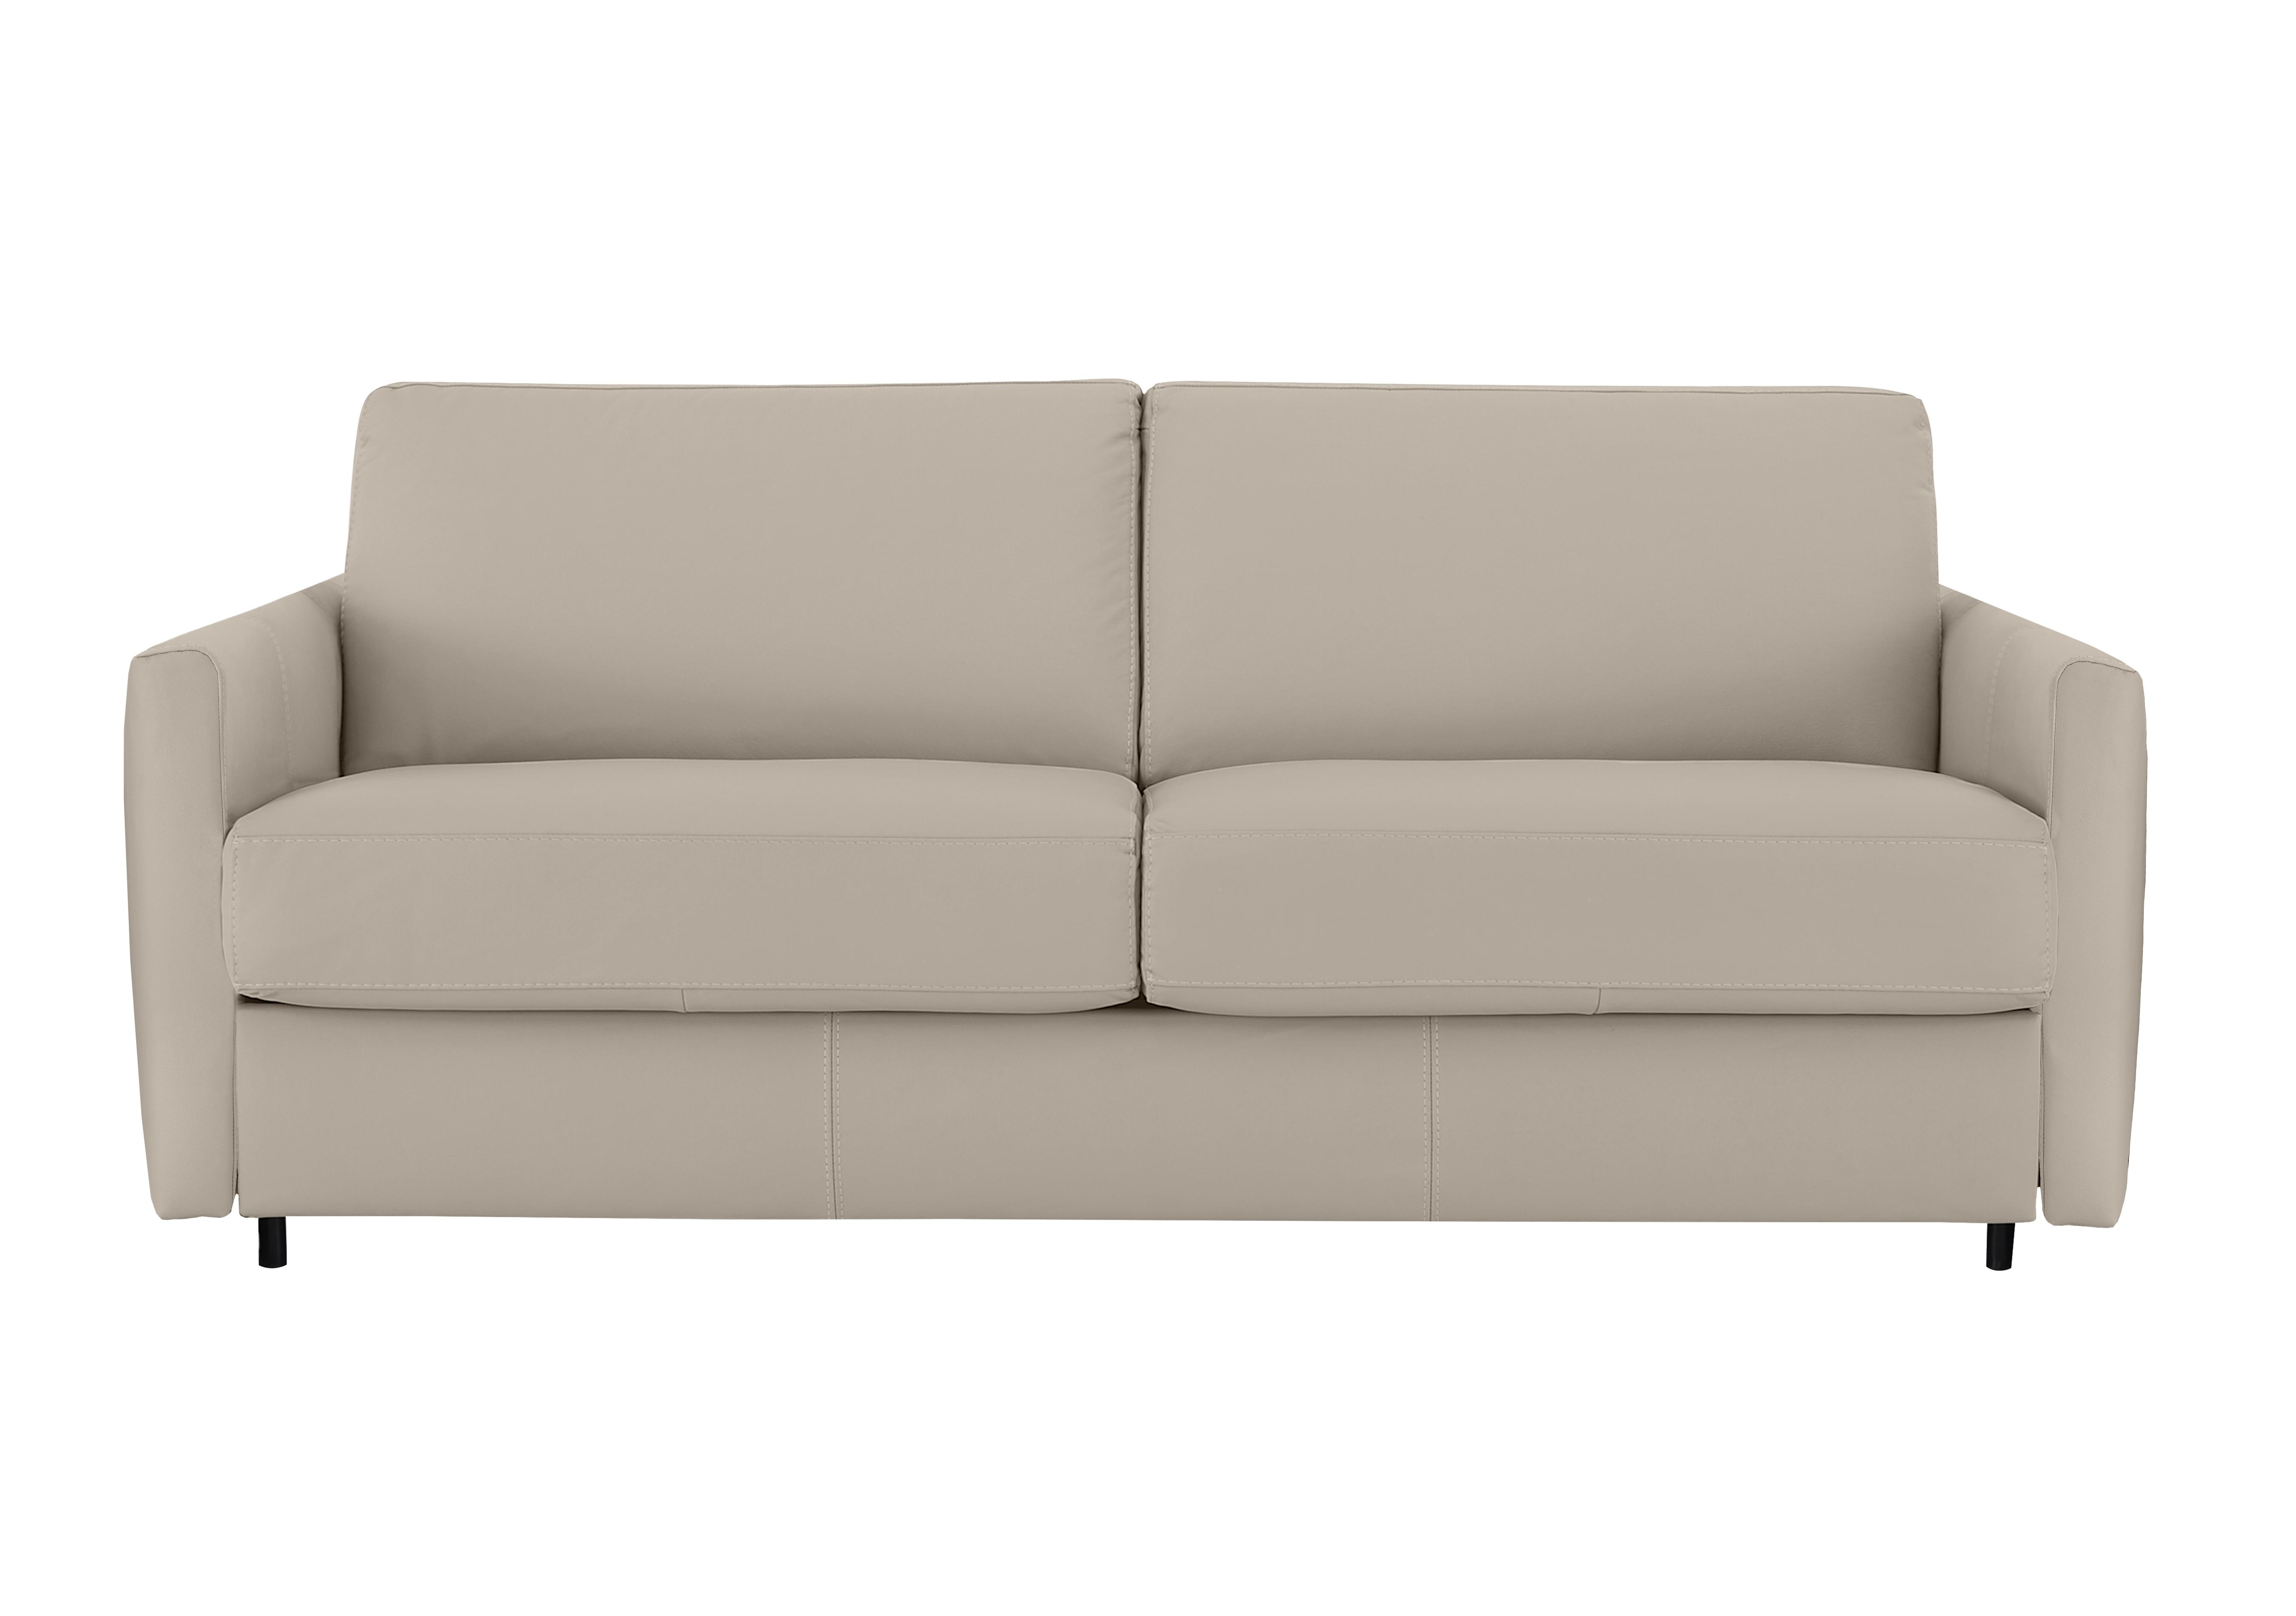 Alcova 3 Seater Leather Sofa Bed with Slim Arms in Botero Crema 2156 on Furniture Village